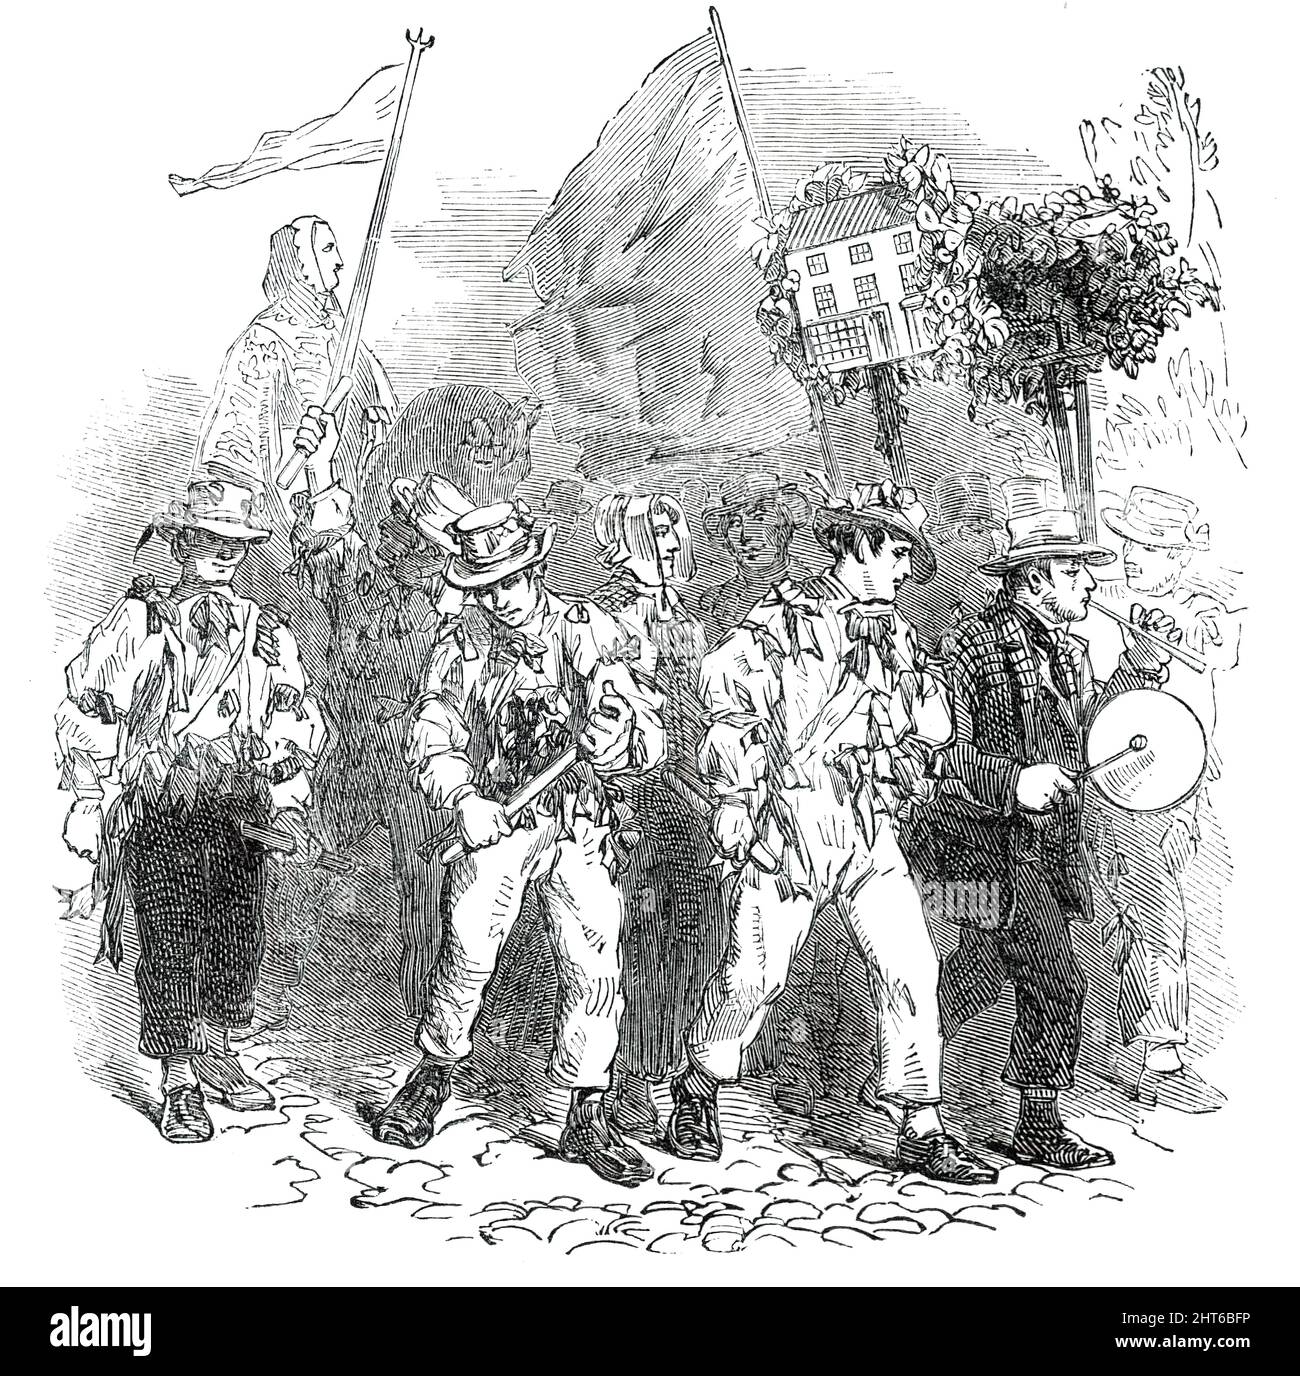 Lichfield &quot;Greenhill Bower&quot; - the Morris Dancers, 1850. Annual tradition: 'This very ancient festival was celebrated...with more than its usual ceremonies. The origin of it was a &quot;Court of Arrray or View of Men and Arms,&quot; in existence long anterior to the Charter of Incorporation of the City, which had its first establishment in the reign of King Edward the Second, in the year 1387, so that the festival cannot be less than 500 years old! In the olden times, processions were made by the public officers of the city, and the dezeners (constables) of each ward bore tutelary sai Stock Photo